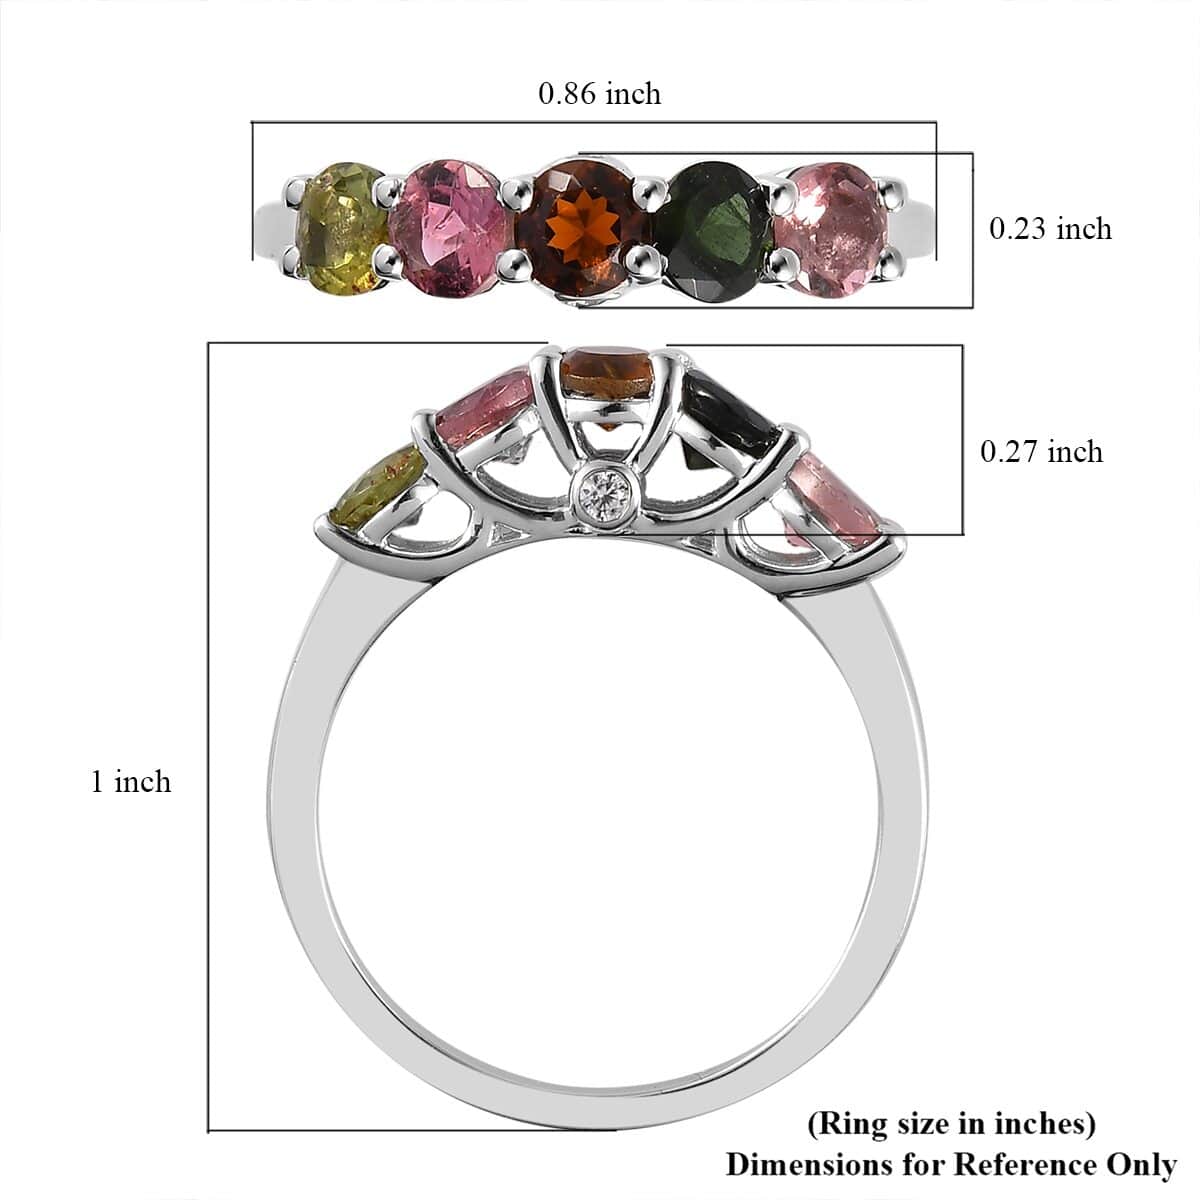 doorbuster-multi-tourmaline-and-natural-white-zircon-5-stone-ring-in-platinum-over-sterling-silver-size-10.0-1.35-ctw image number 5